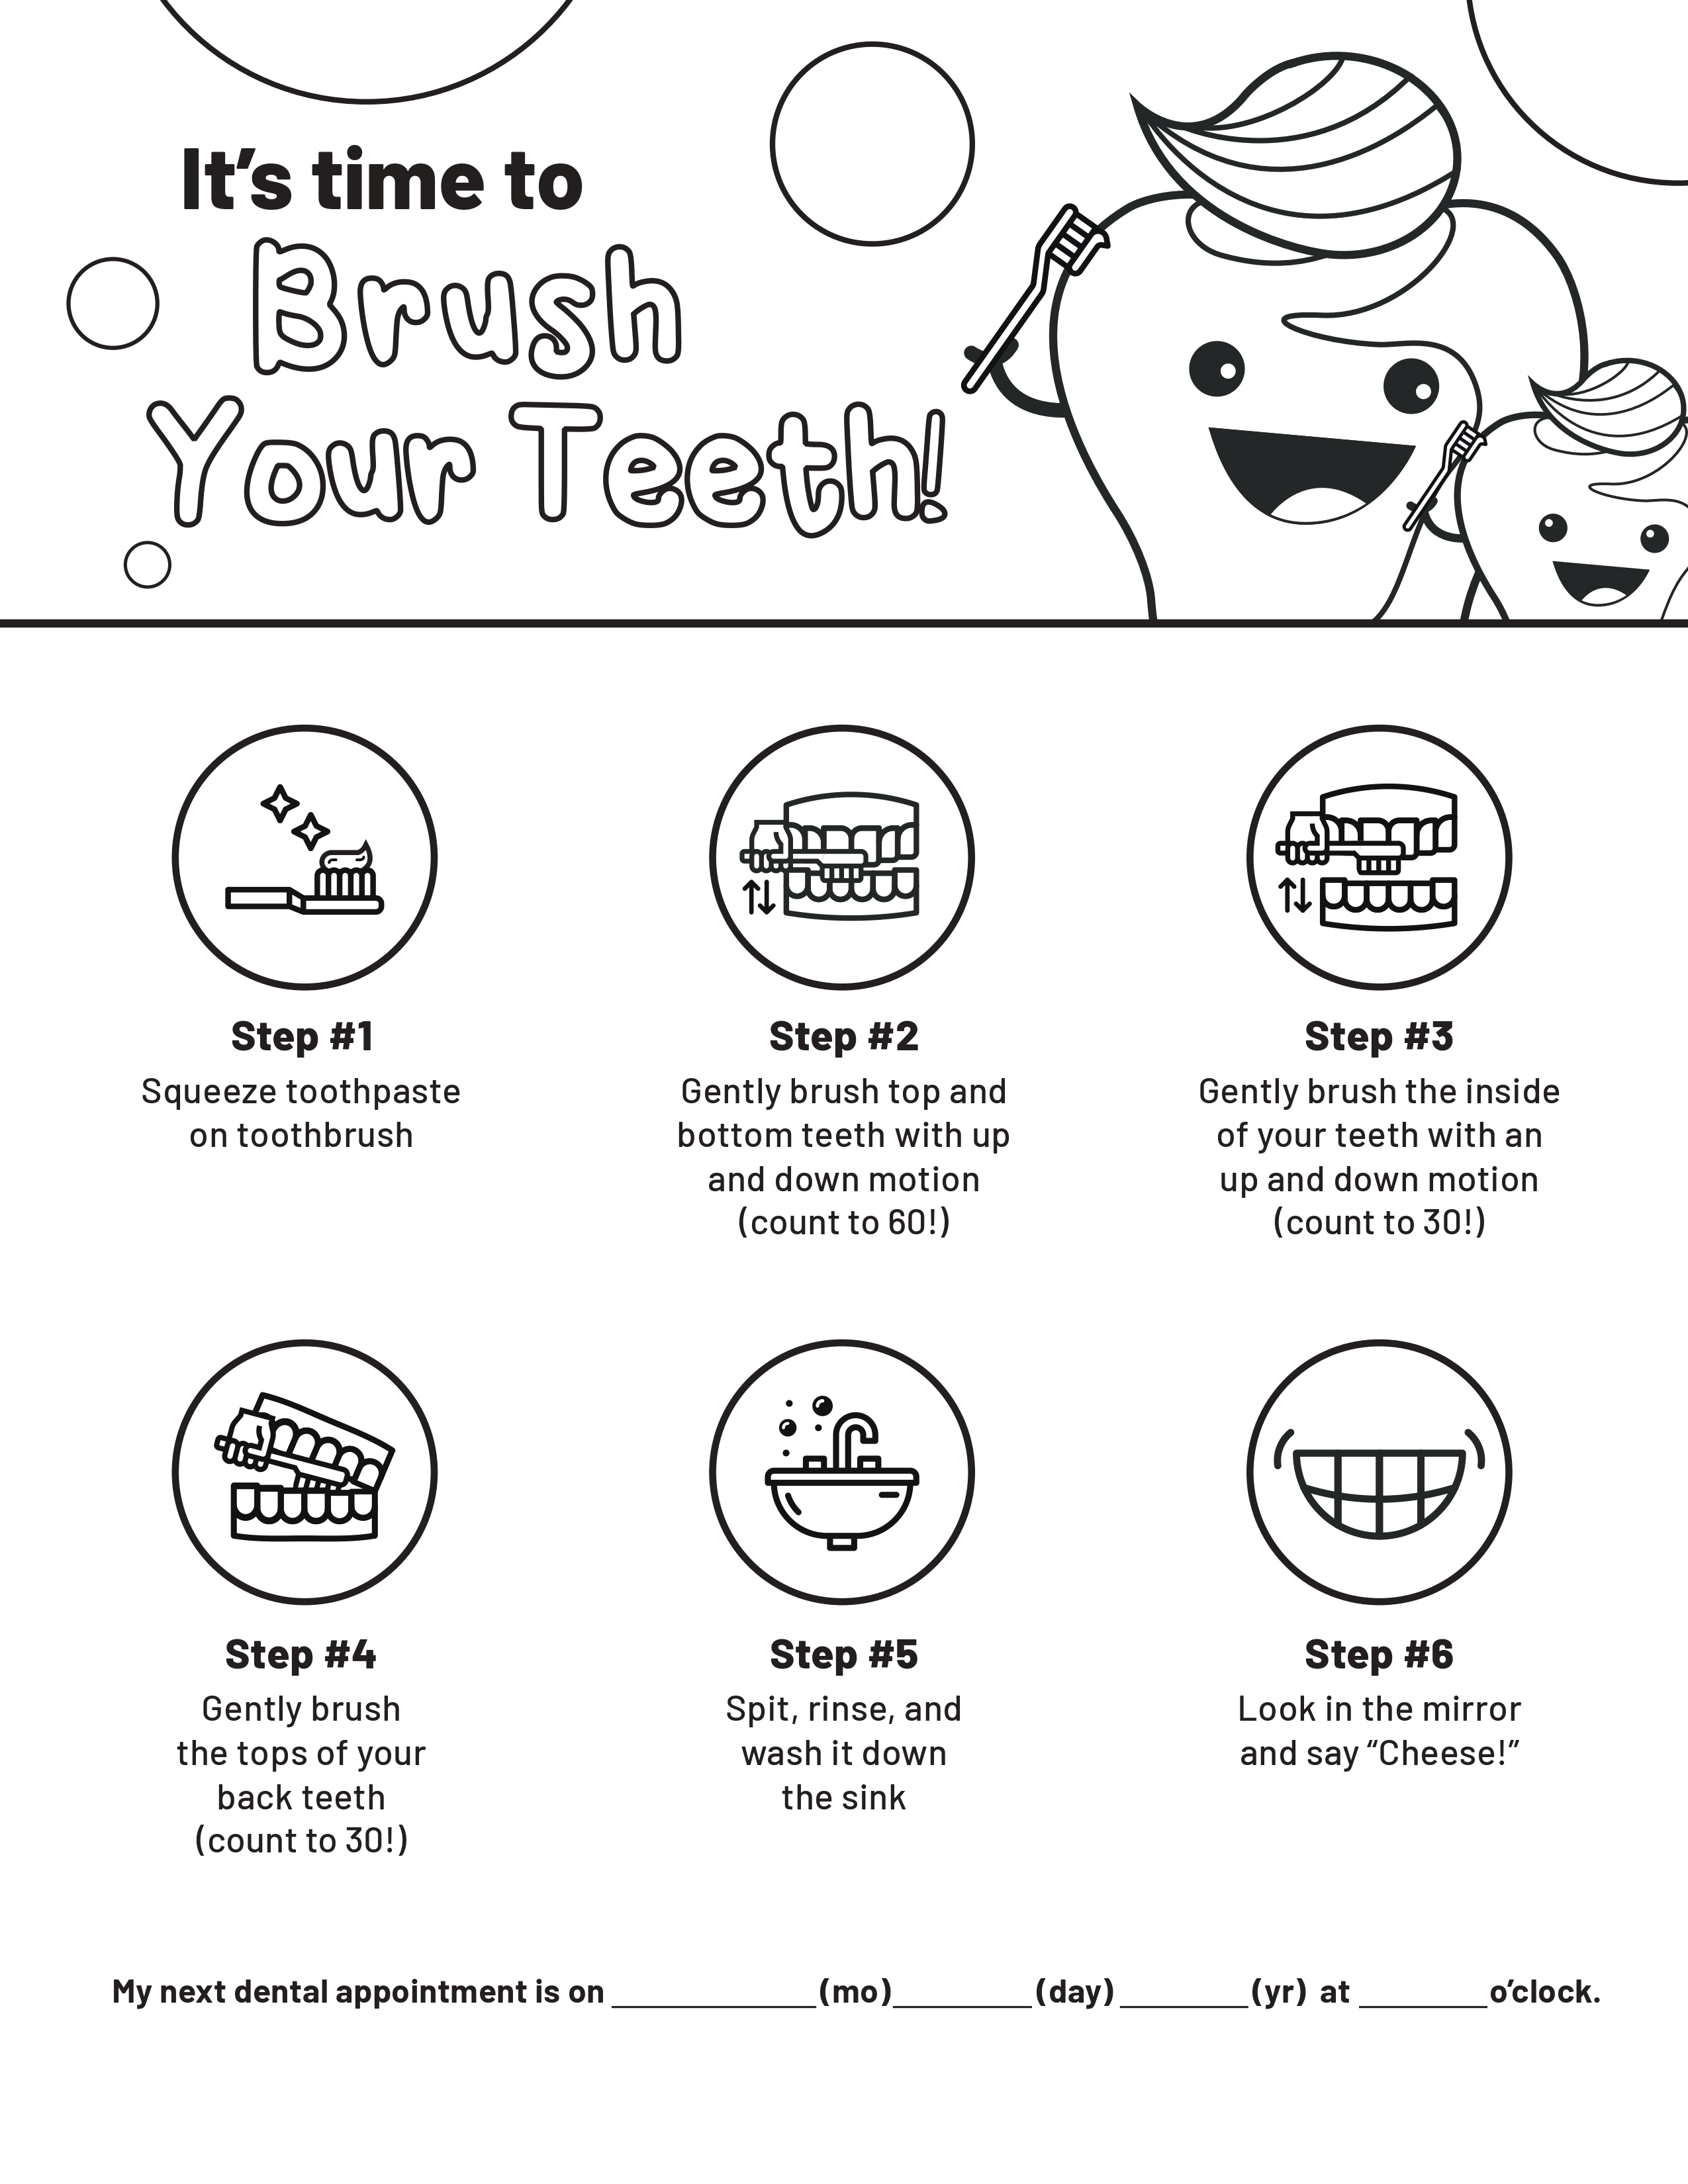 Time to Smile -How to Brush